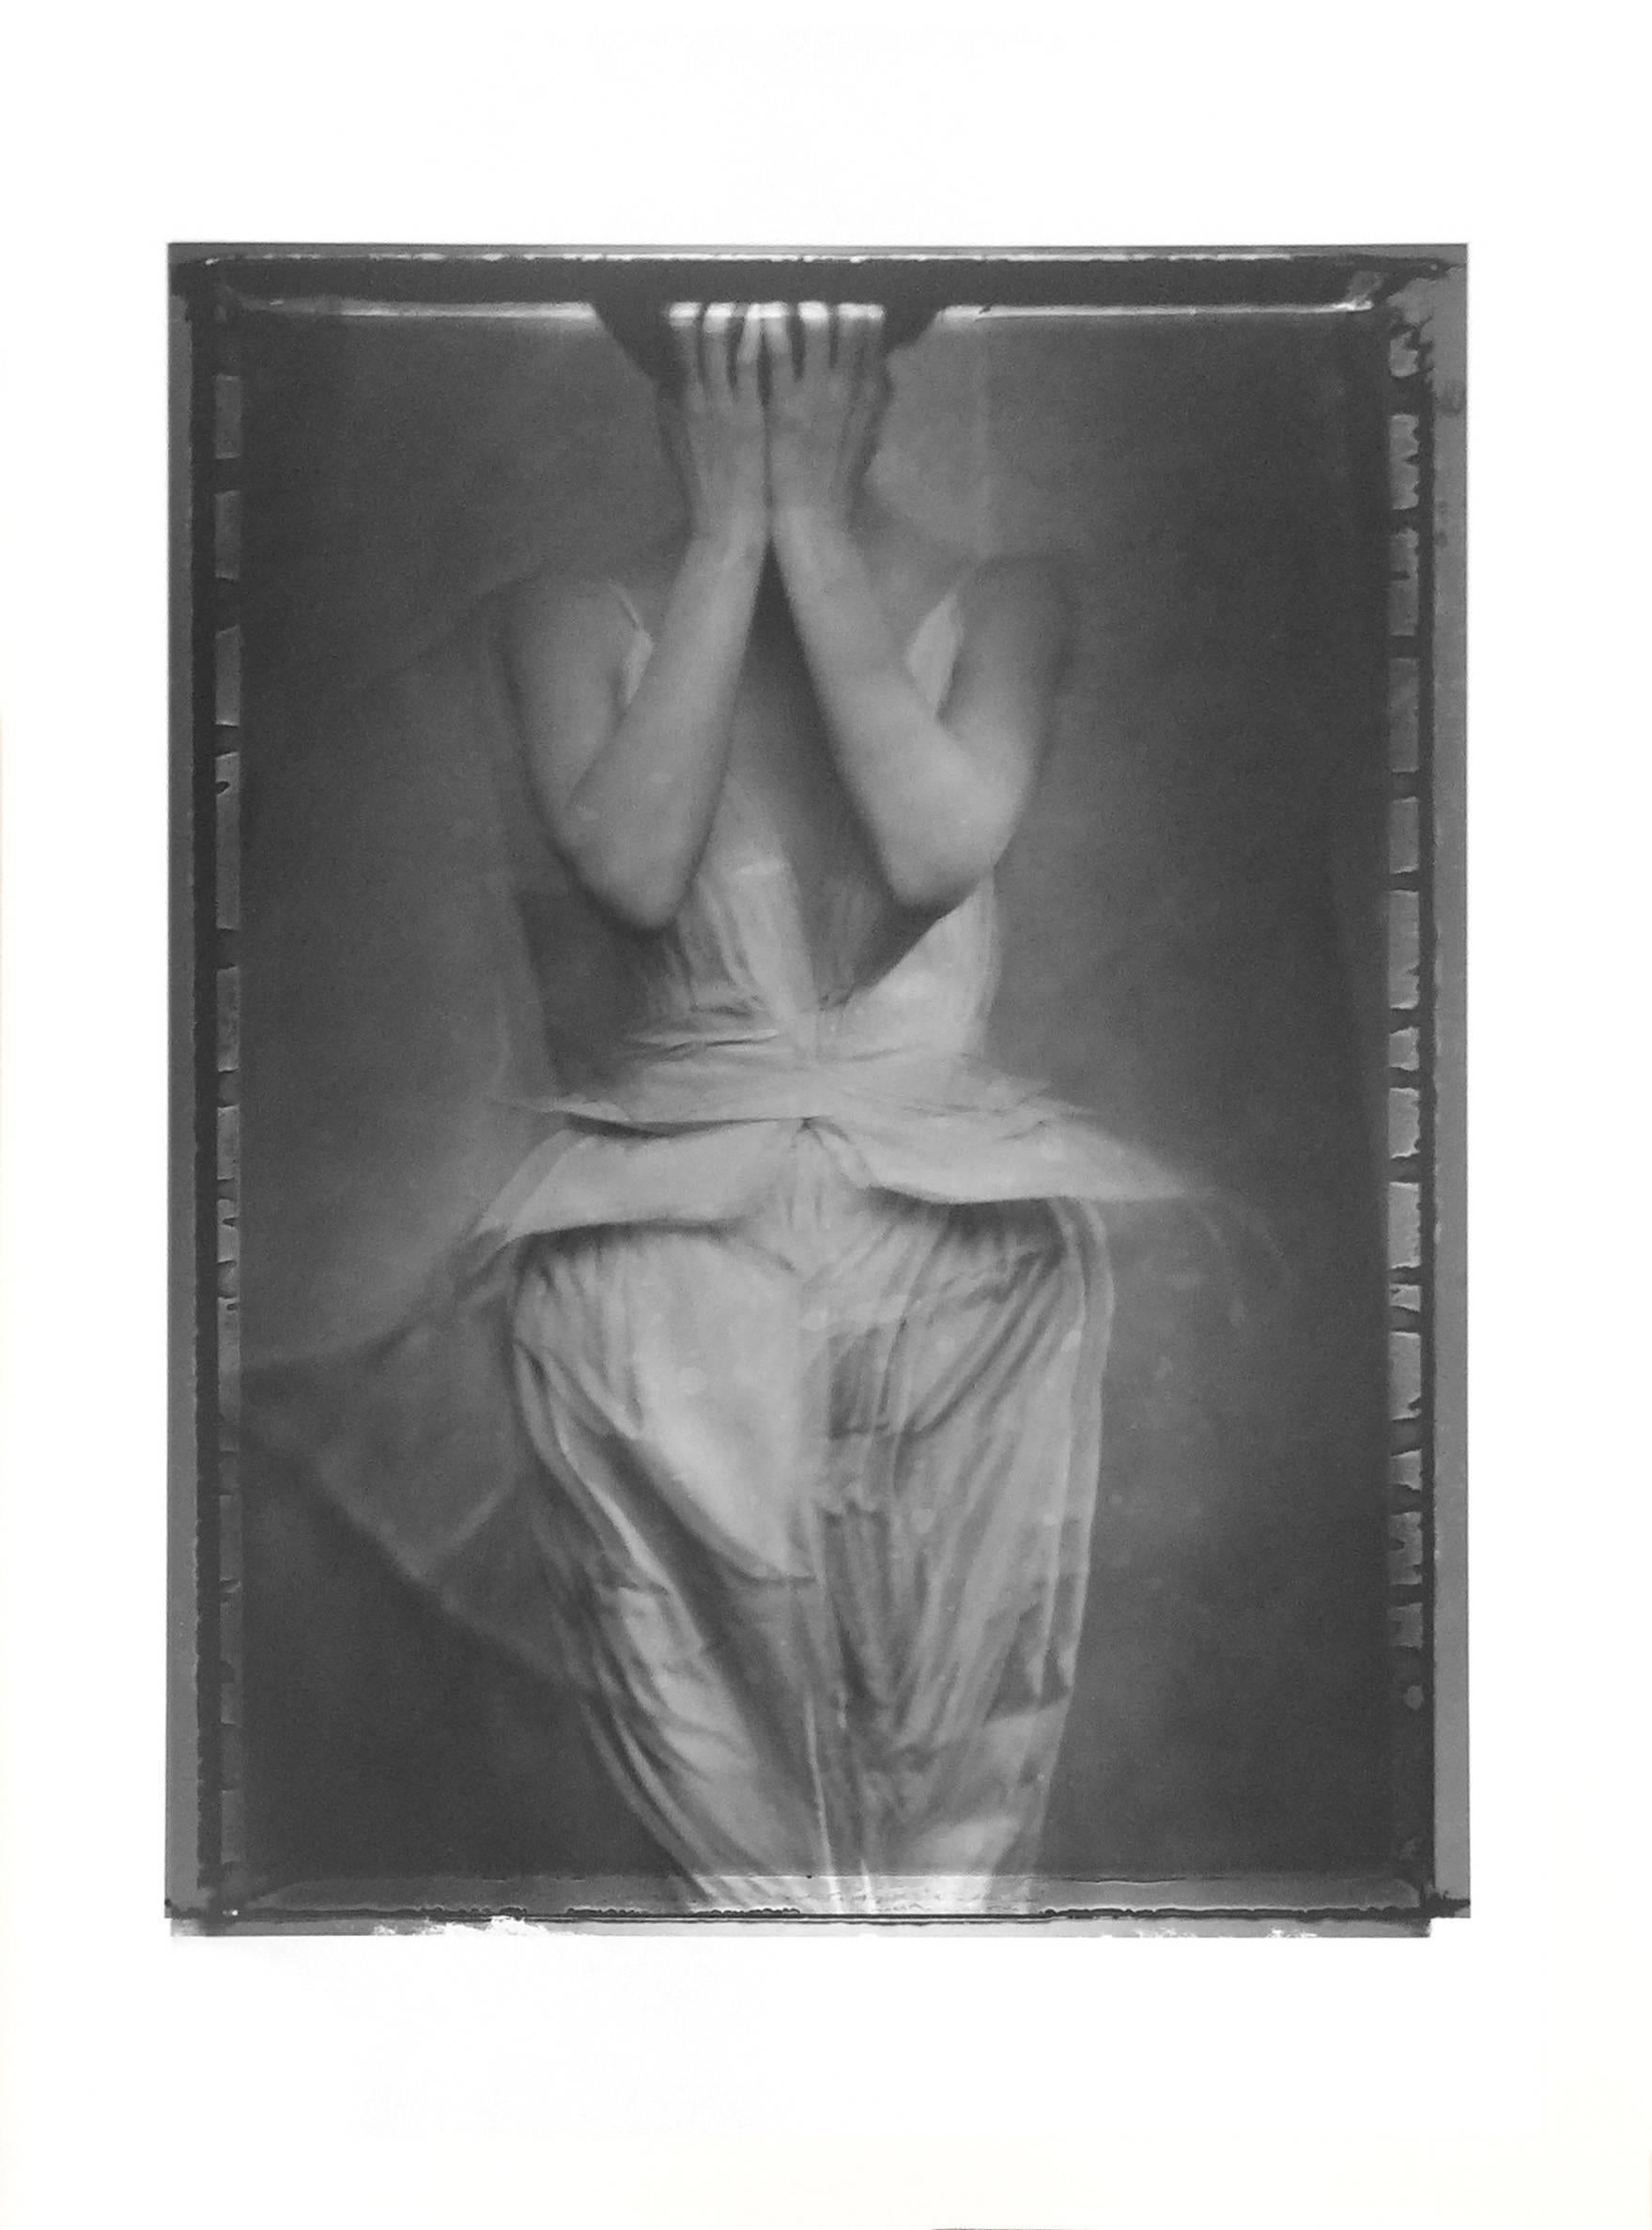 Sarah Moon Portfolio printed and bound by CameraWork, 1999
10 gelatin silver print works, printed and bound into a book. Comes in a protective traveling case.
The overall wall size composition of the entire portfolio is 45 in H  x 60 in W
Each